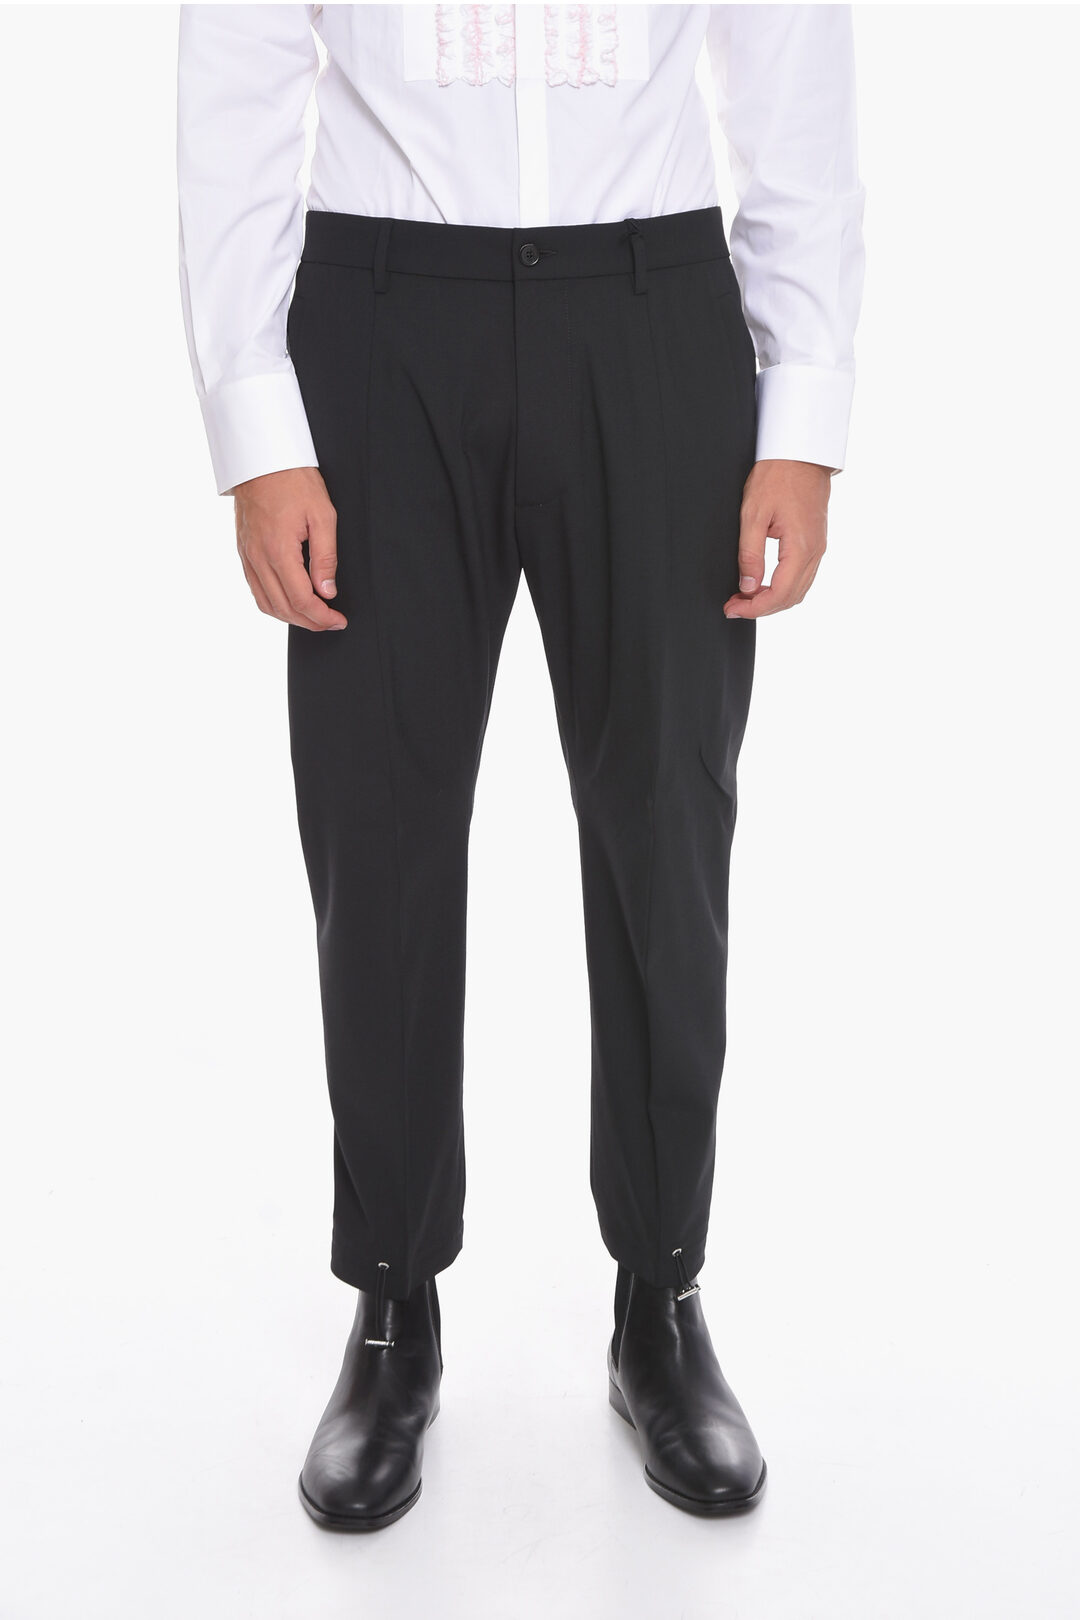 Dsquared2 Wool Blend Pully Trousers with Loose-fit men - Glamood Outlet